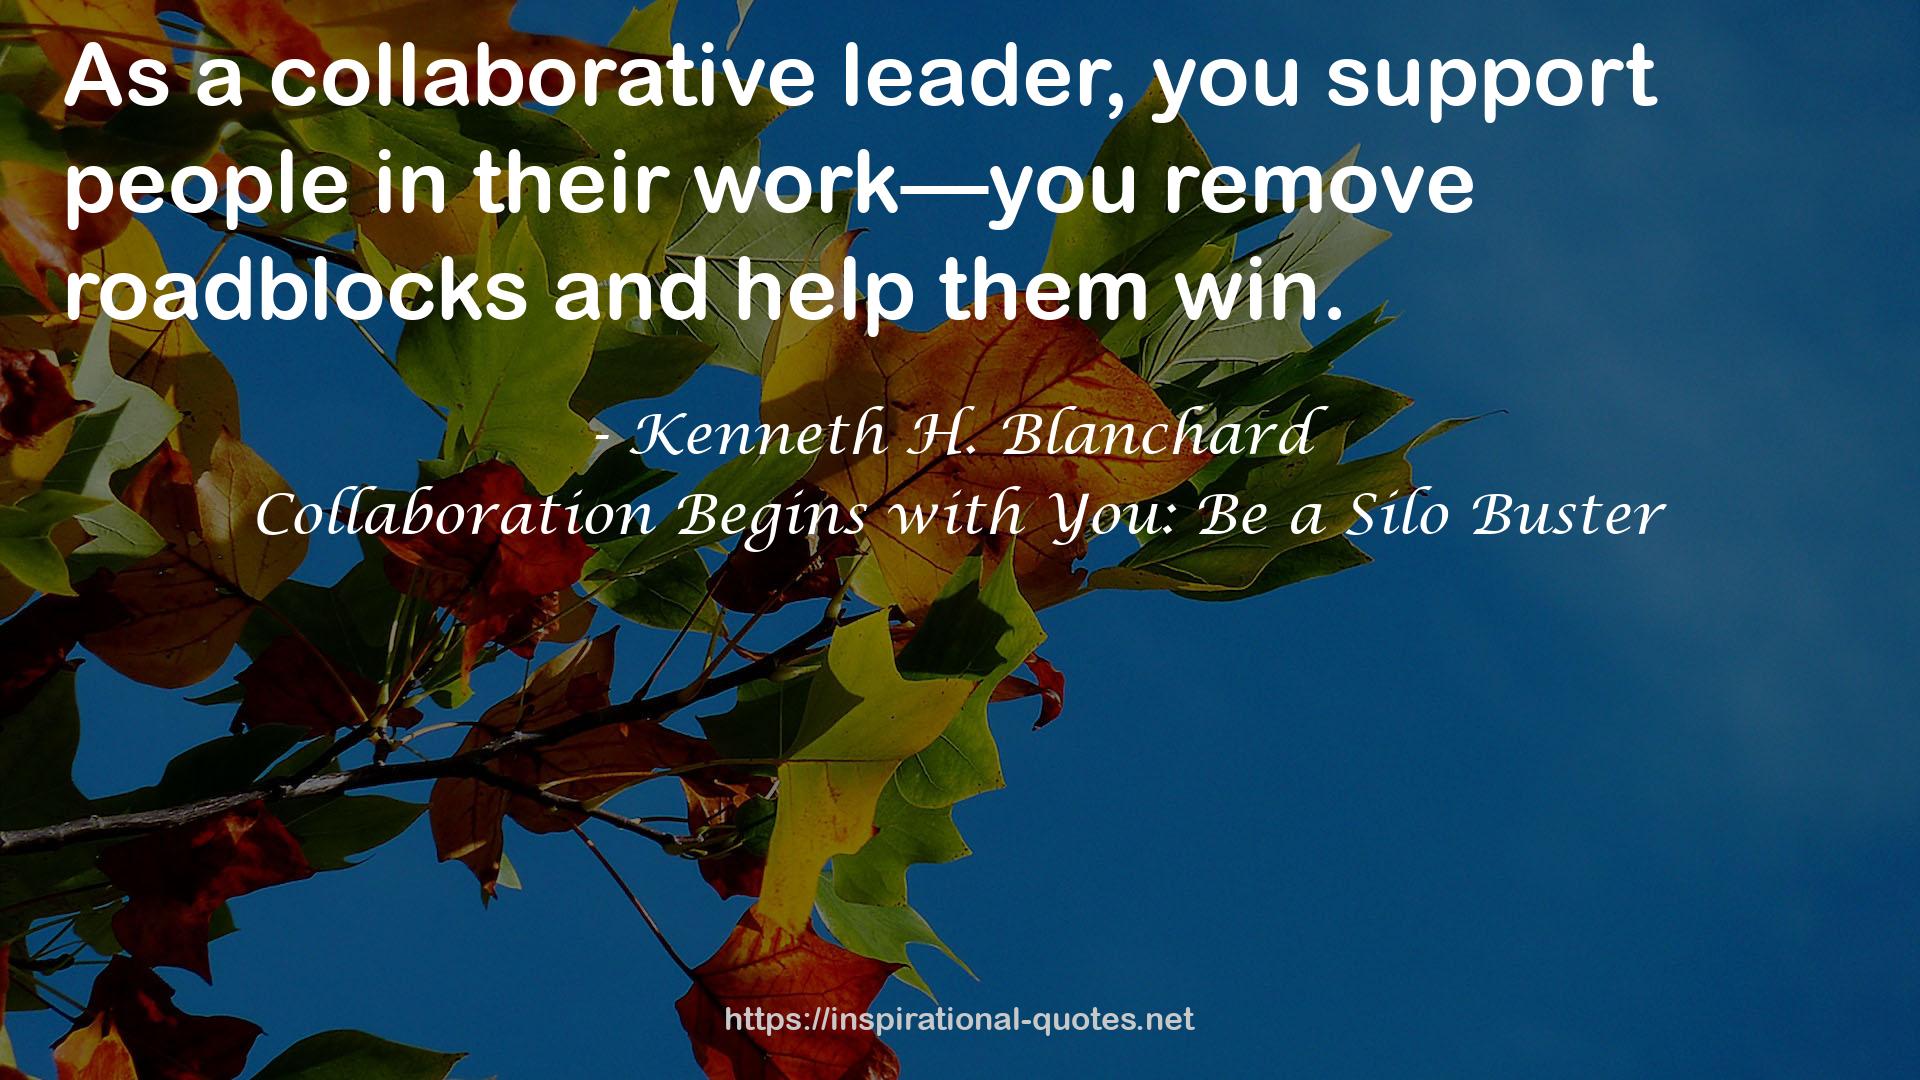 Collaboration Begins with You: Be a Silo Buster QUOTES